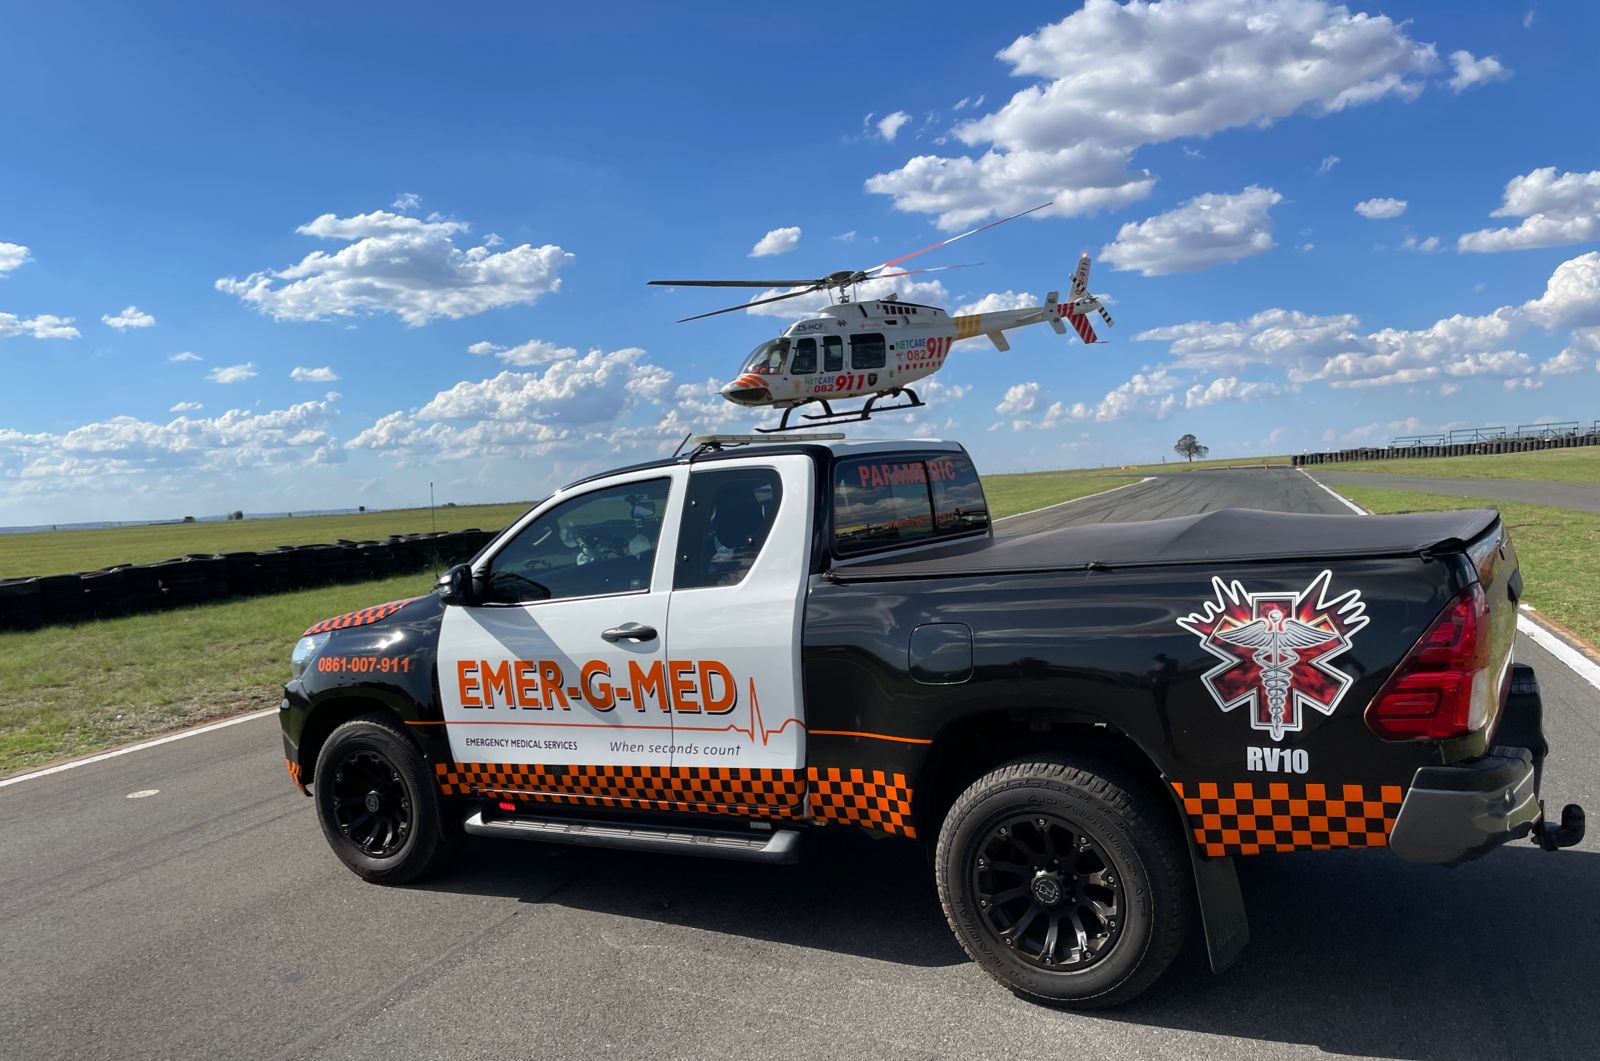 Patient airlifted after collapsing at Redstar Raceway